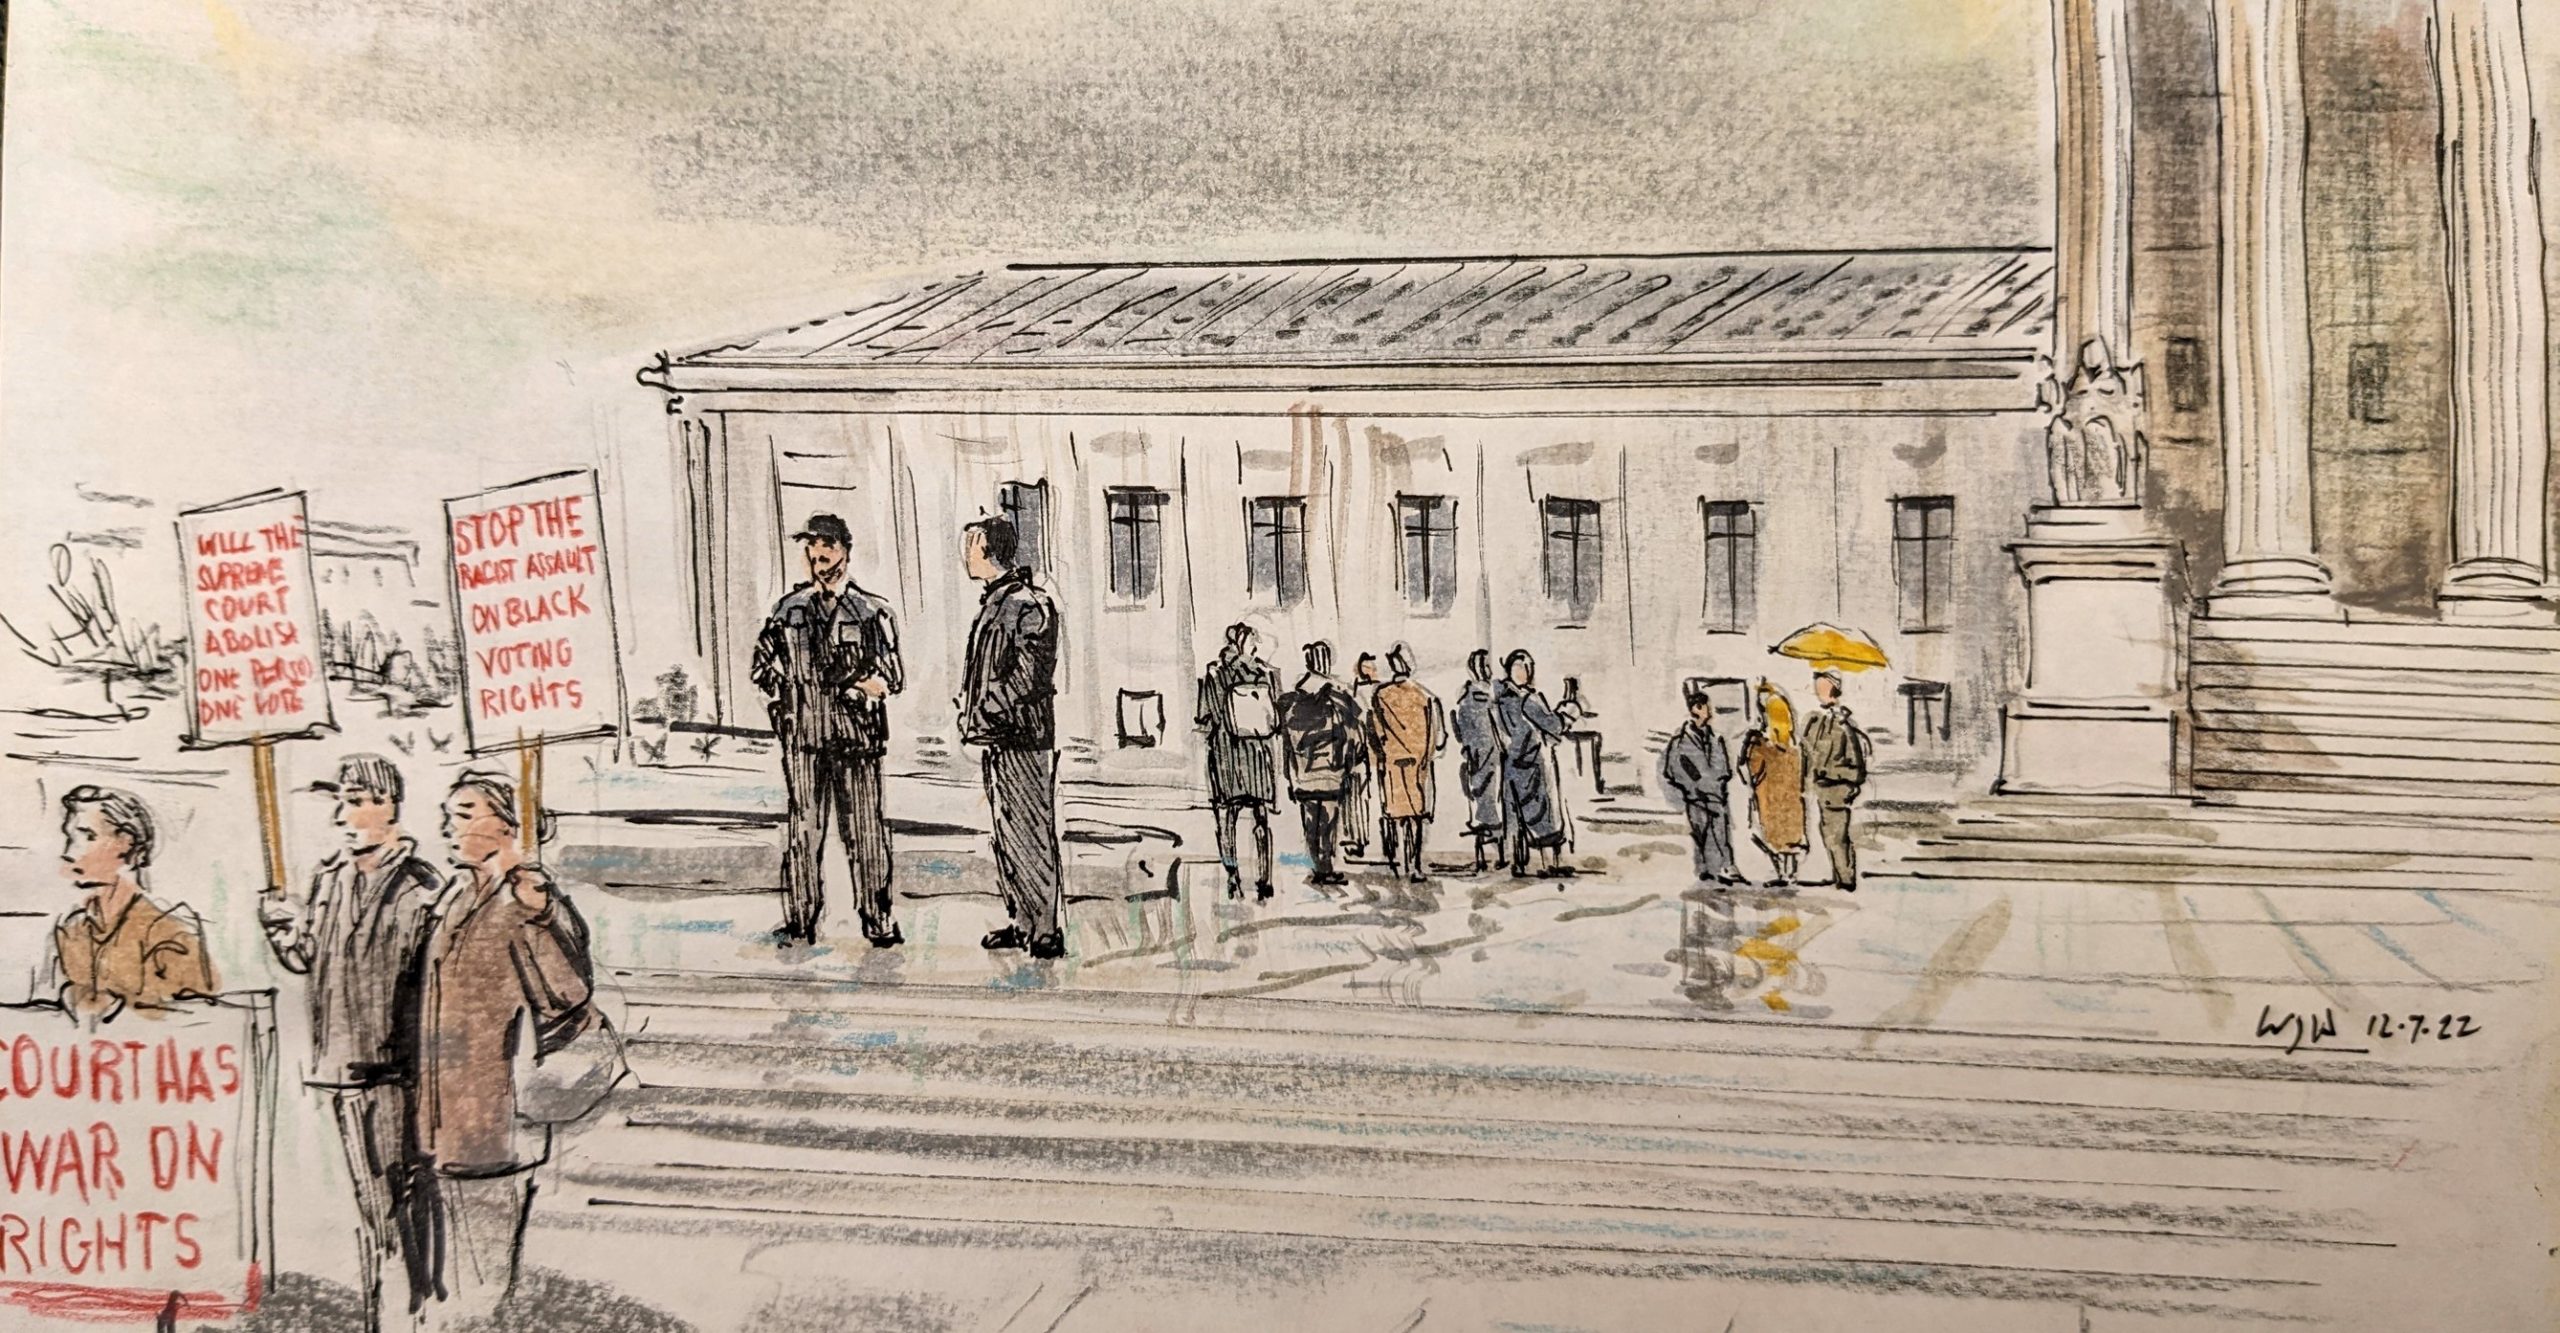 Sketch of a loose crowd hanging out in front of the court before argument on a rainy day. Among others, there is a man with a yellow umbrella, two officers, and a few voting rights demonstrators in view.